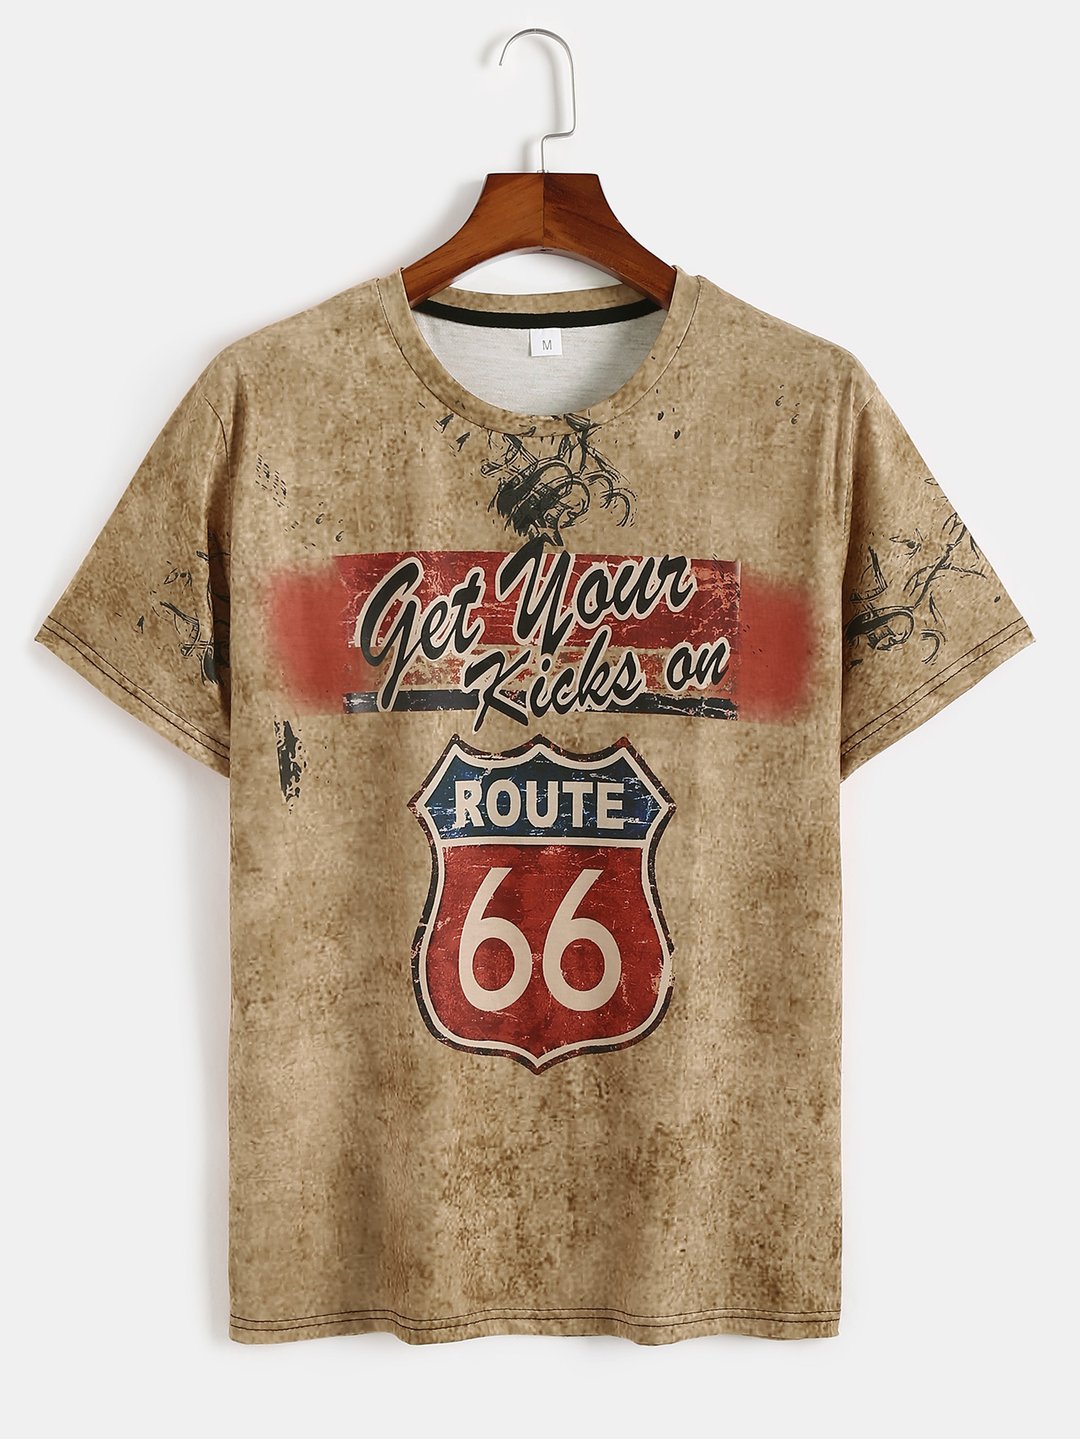 Motorcycle Print T-shirt Route 66